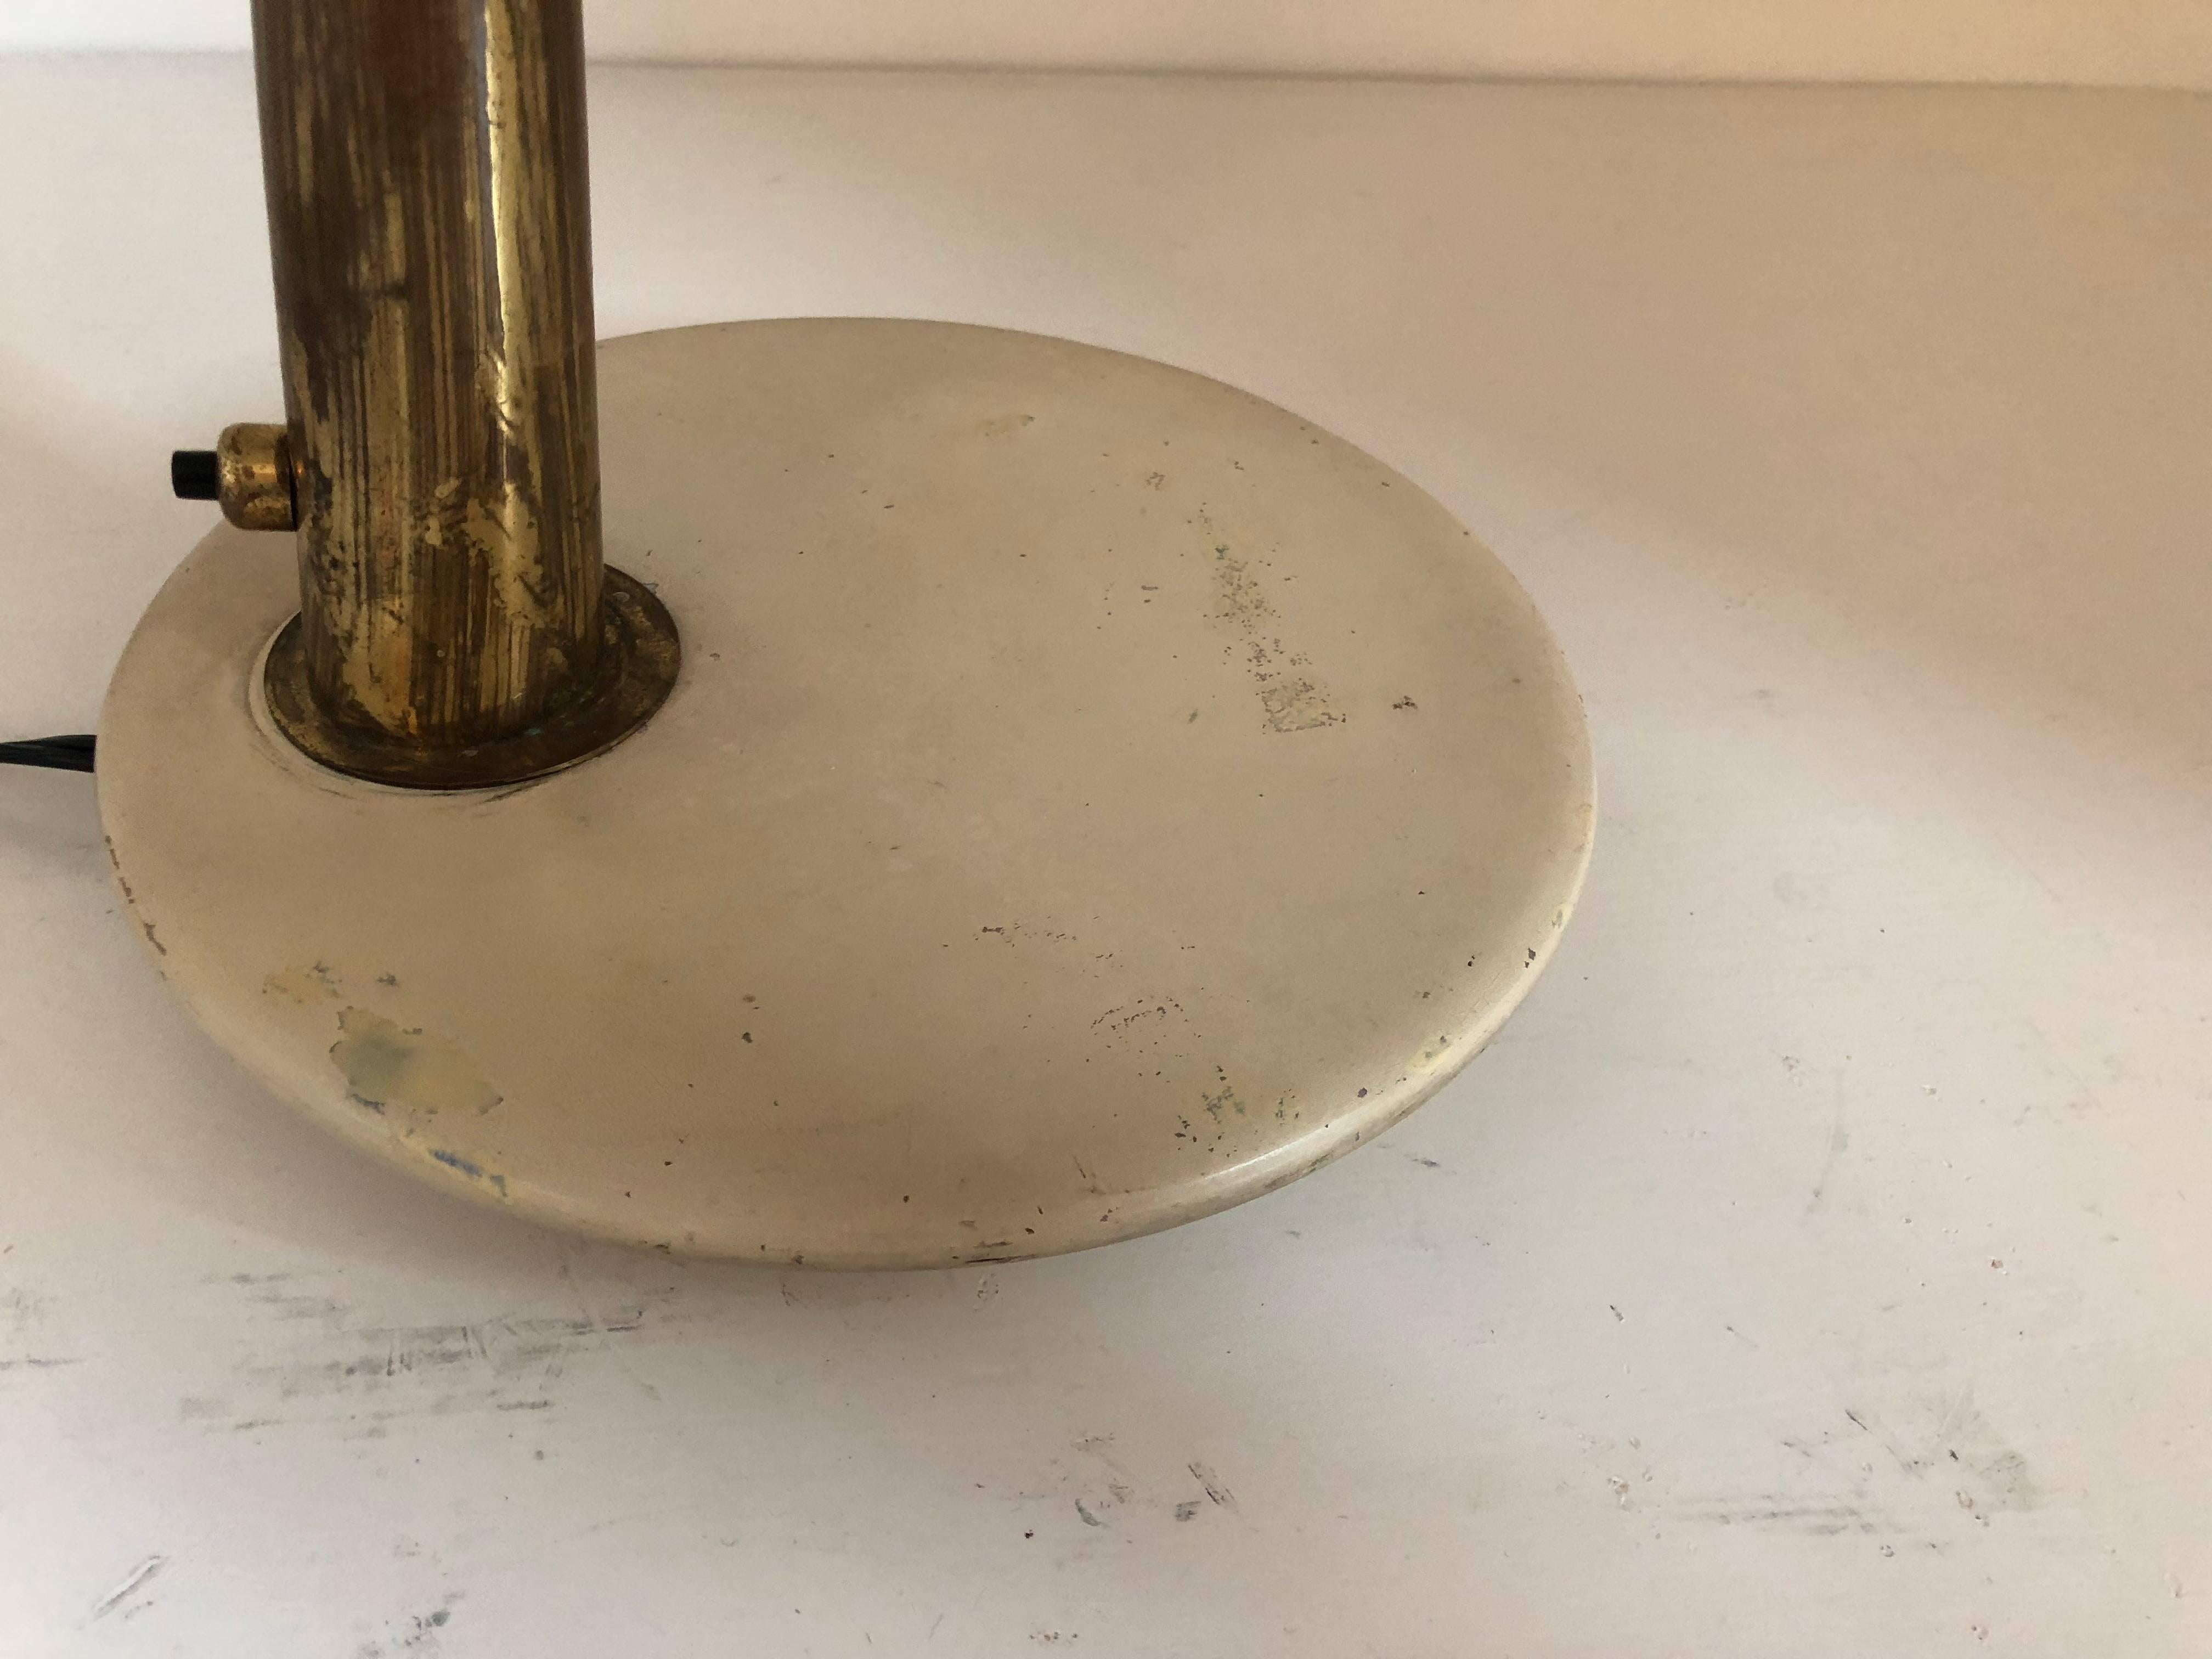 Italian task lamp designed by Giuseppe Ostuni for O-Luce. 
Brass lamp on marble base with enameled metal shade.  
All original. Newly rewired. This lamp can be completely restored upon request.